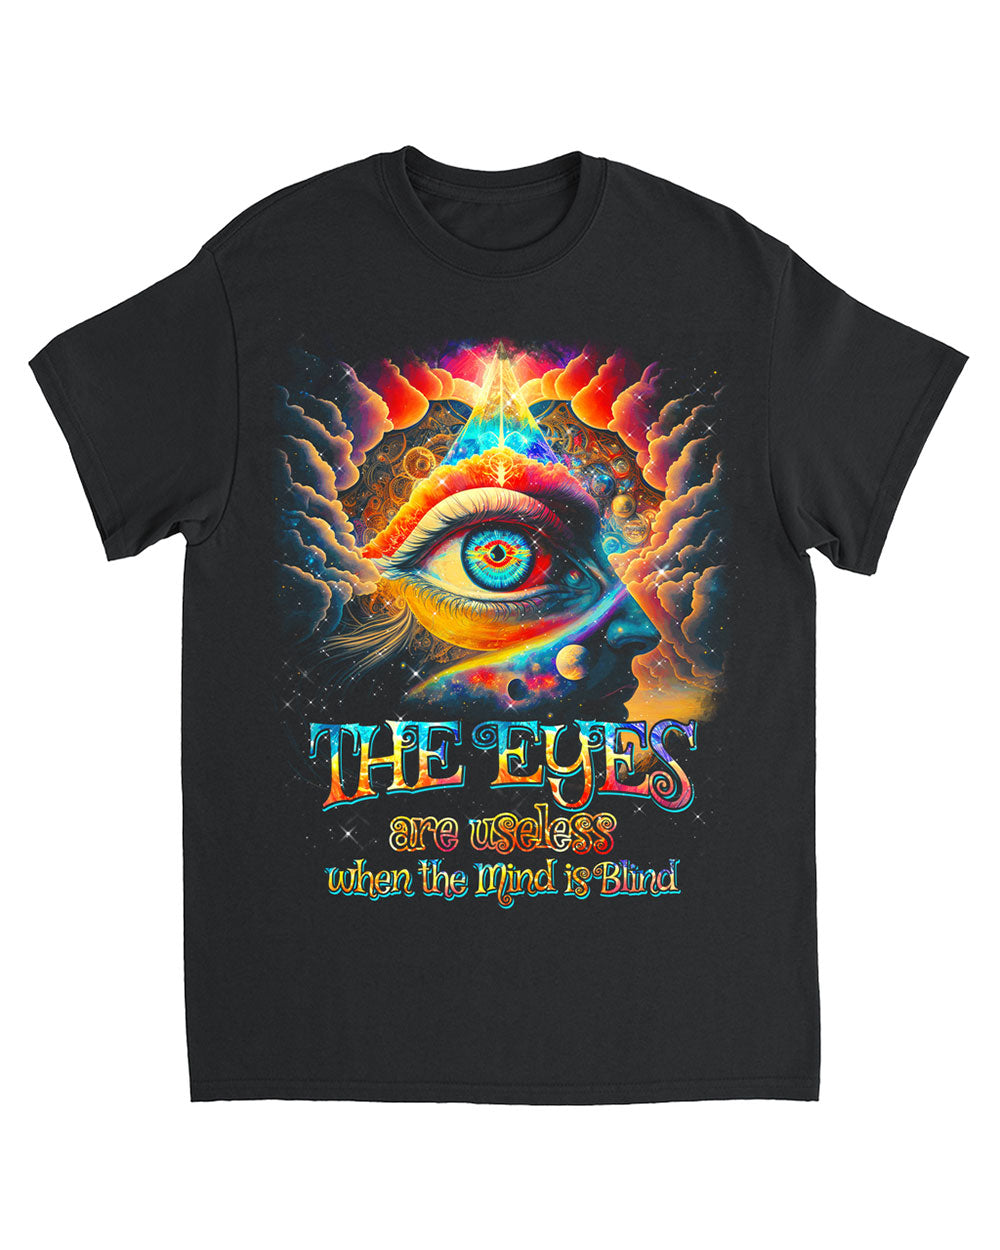 THE EYES ARE USELESS WHEN THE MIND IS BLIND COTTON SHIRT - TYTM2203234